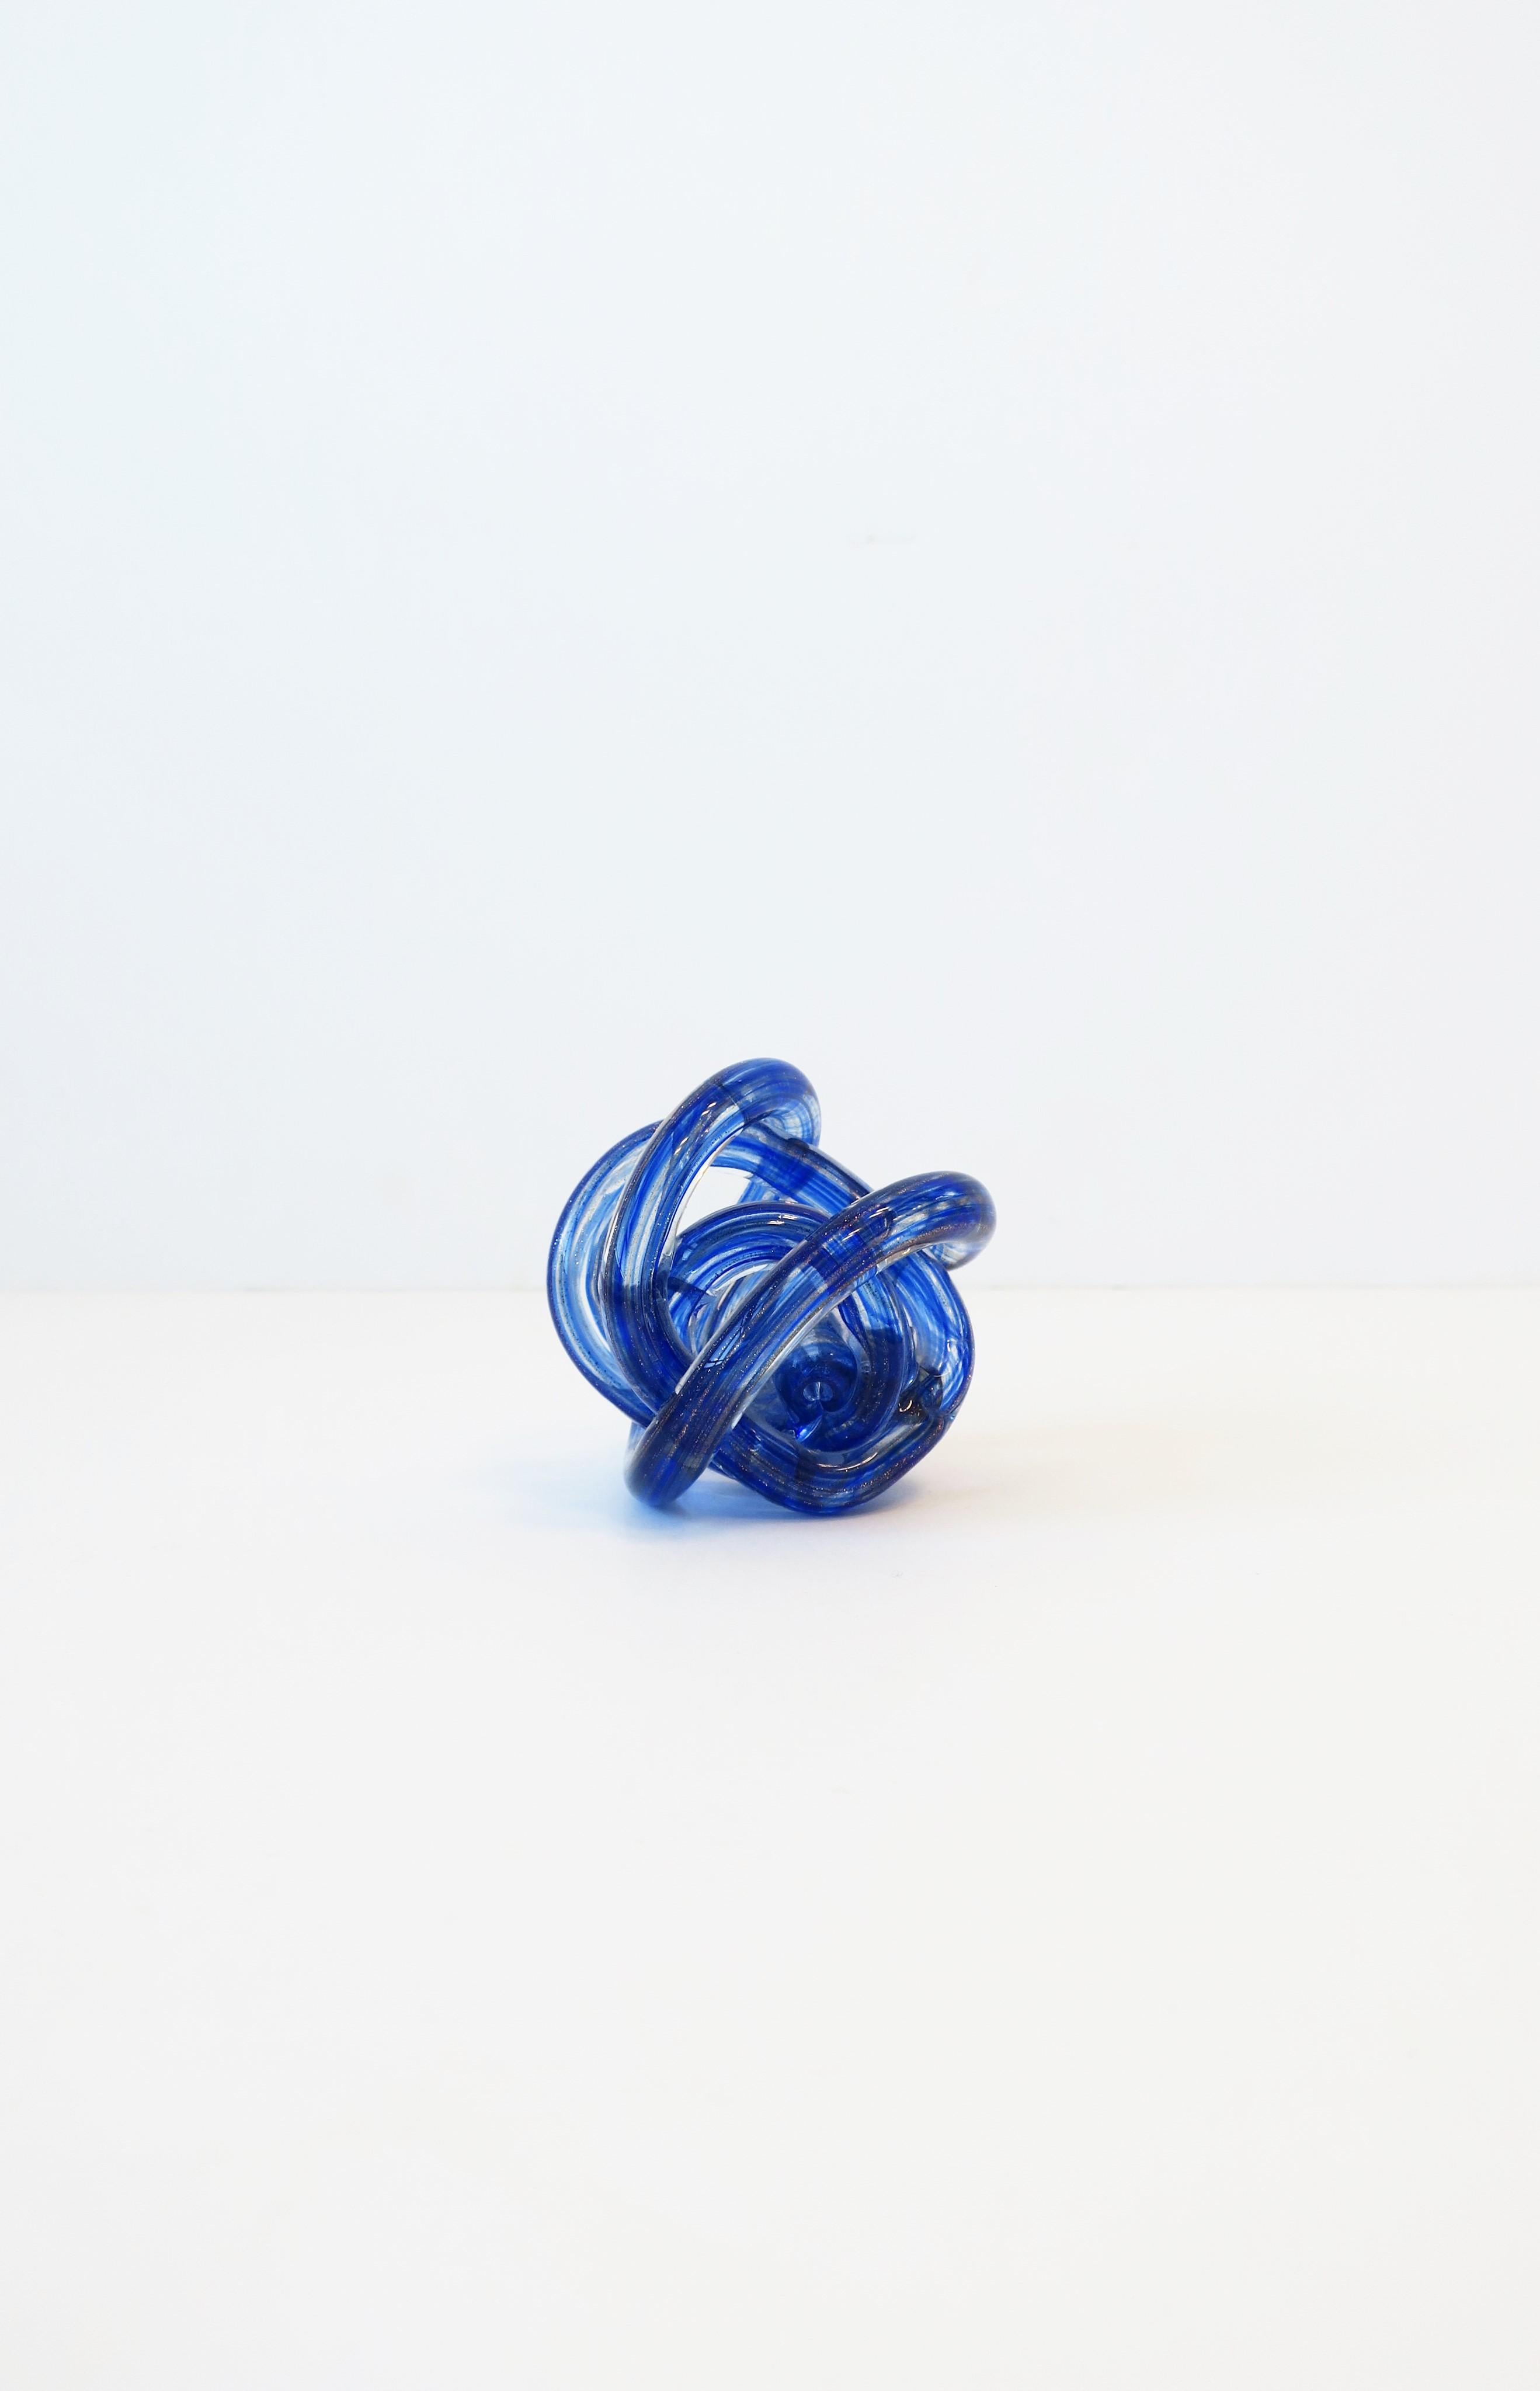 Post-Modern Blue and Shimmering Copper Art Glass Knot